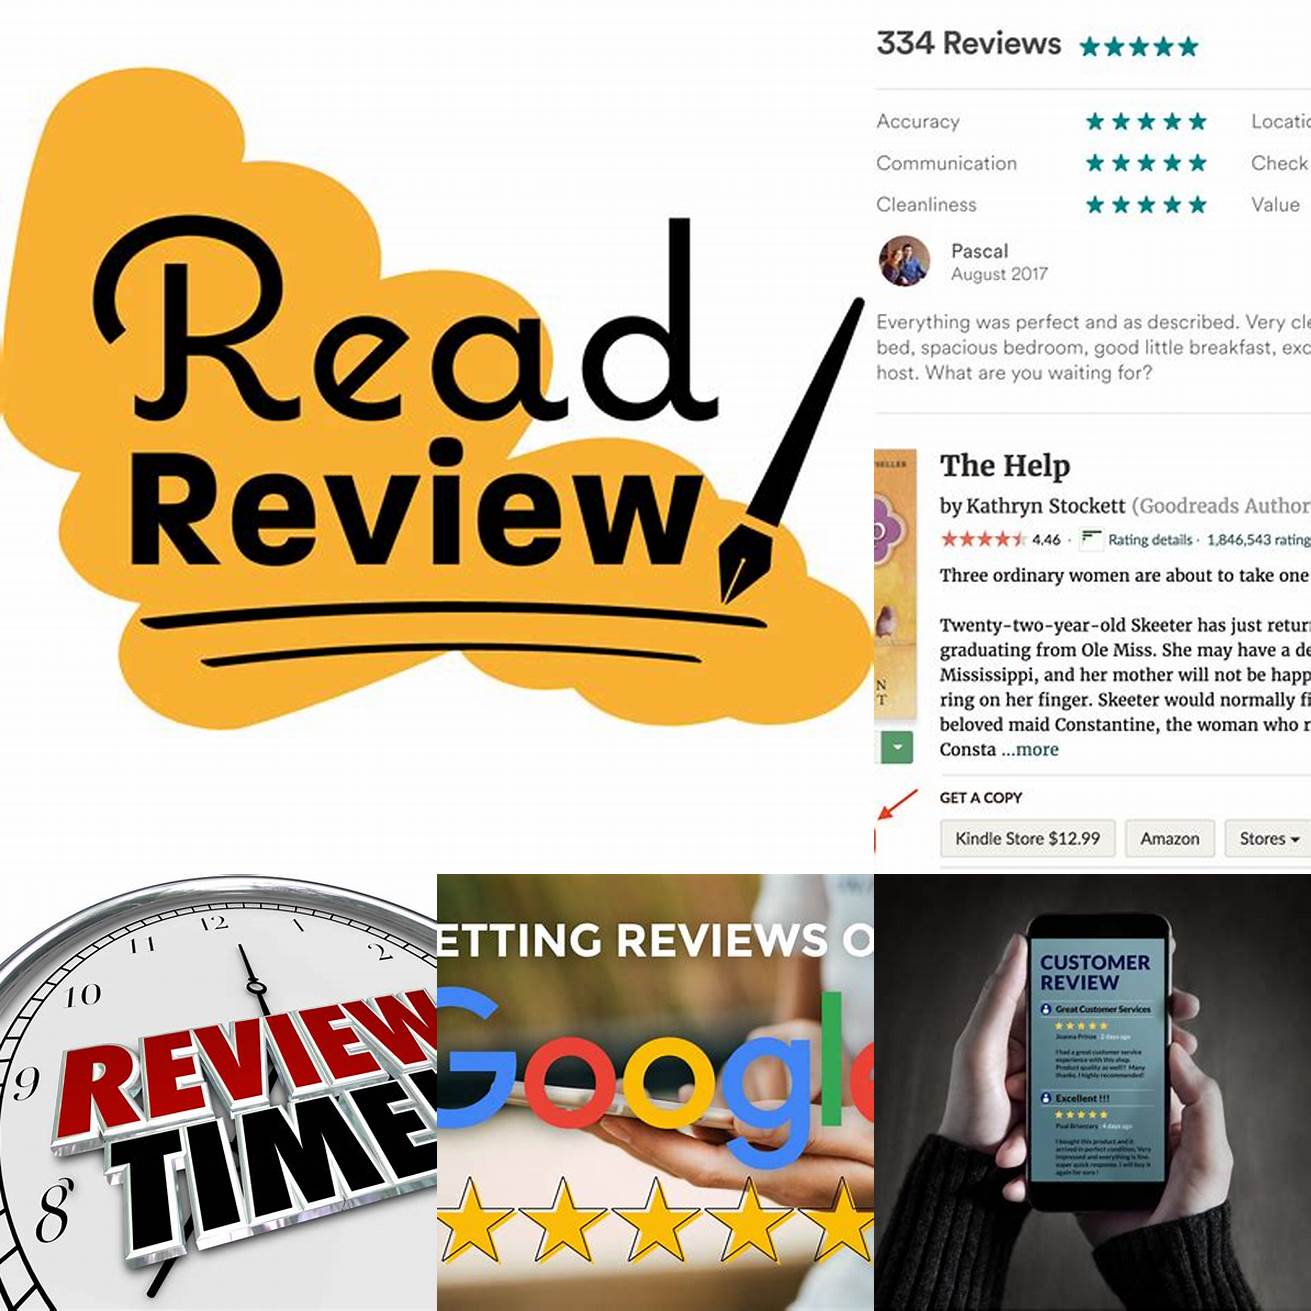 Read the reviews